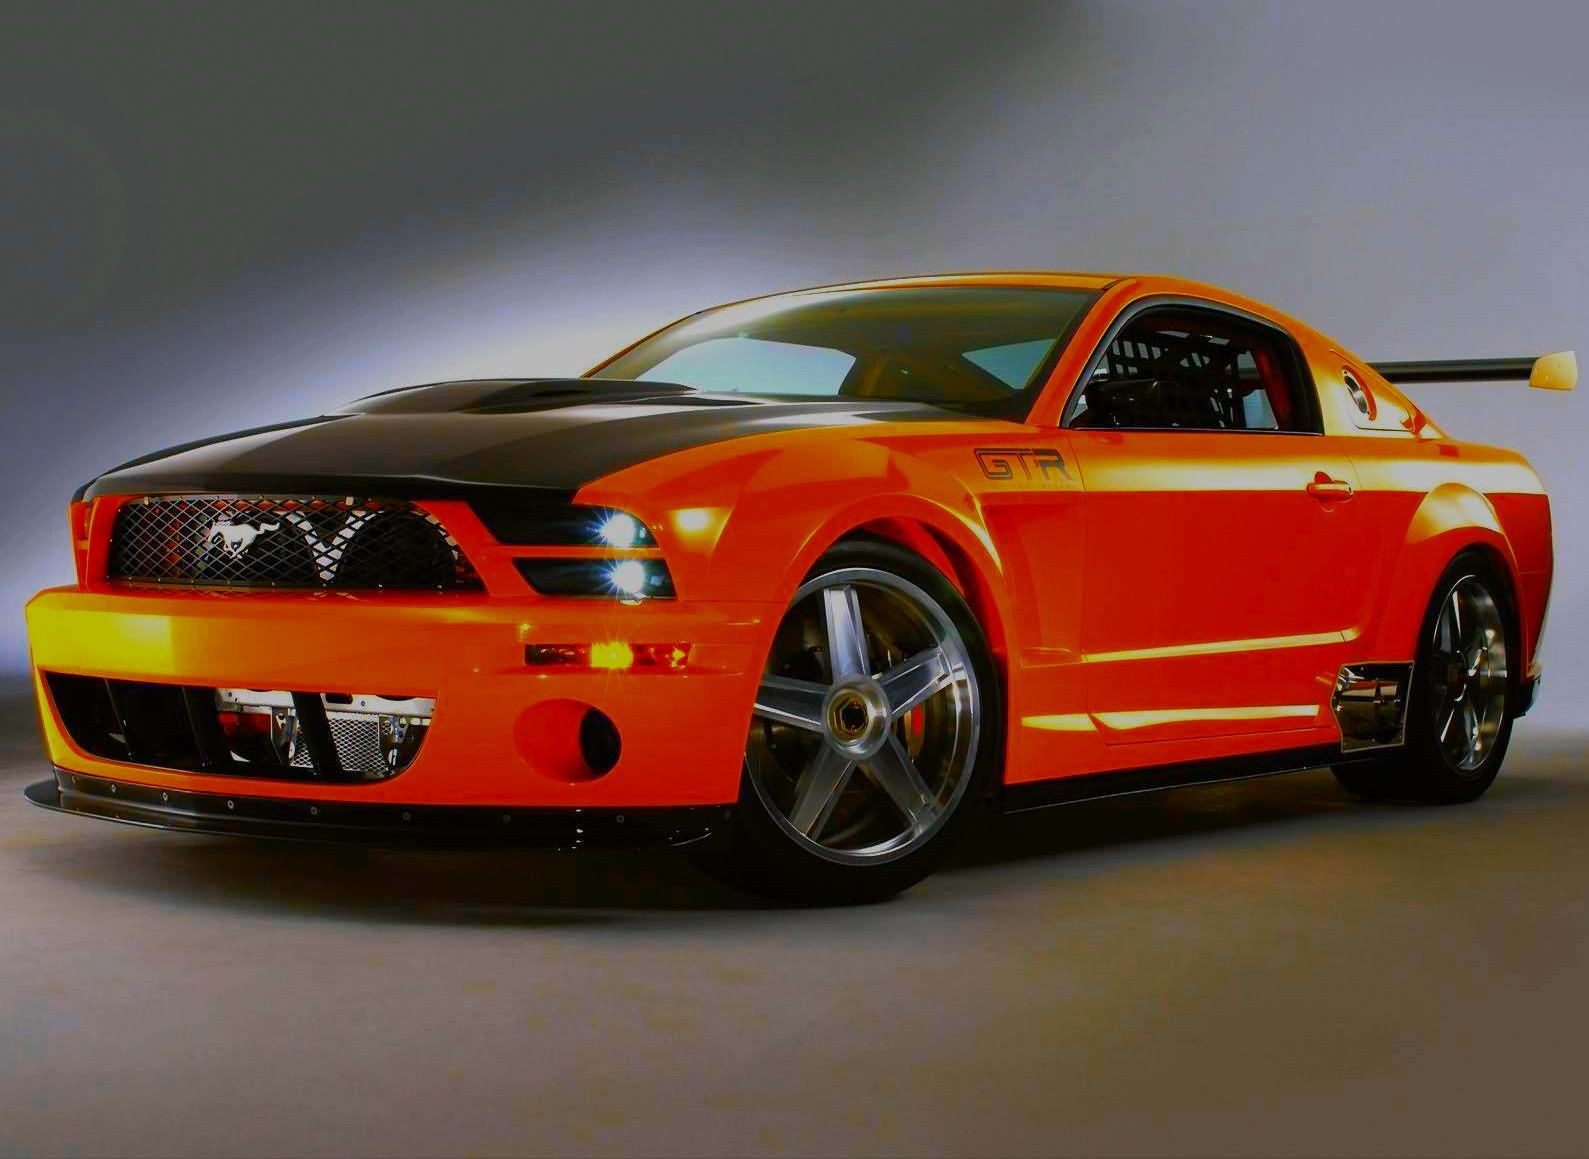 Gray Ford Mustang Shelby Gt500 Picture HD Wallpaper Car